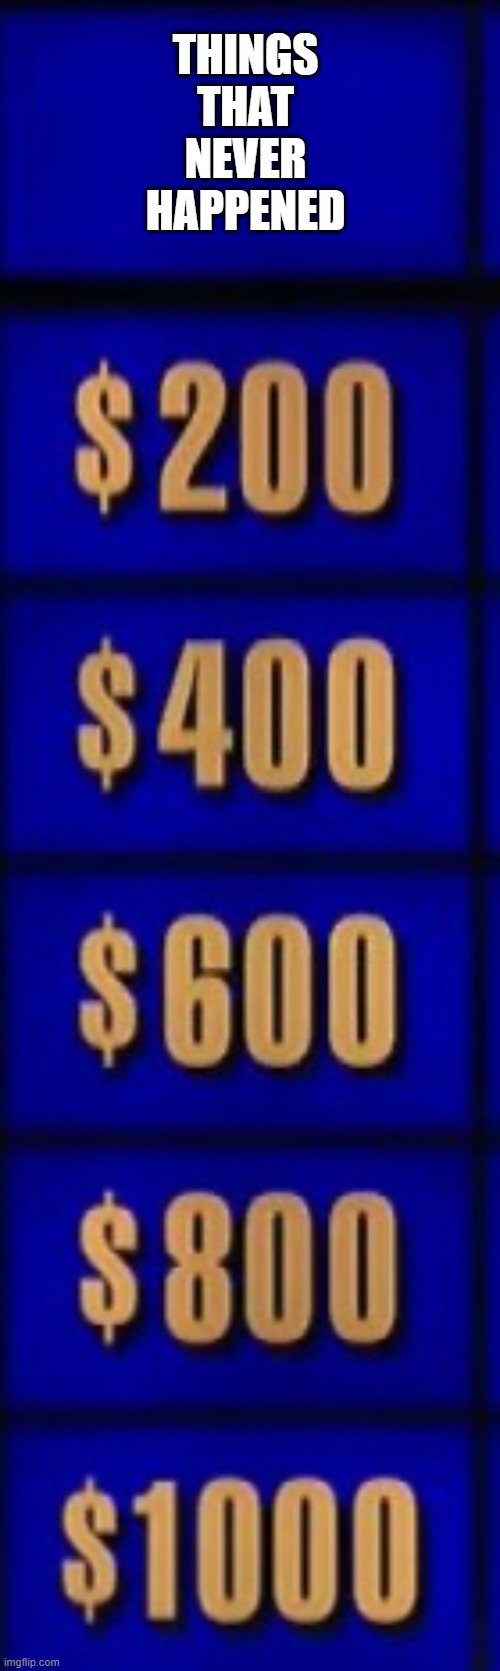 Jeopardy category | THINGS THAT NEVER HAPPENED | image tagged in jeopardy category | made w/ Imgflip meme maker